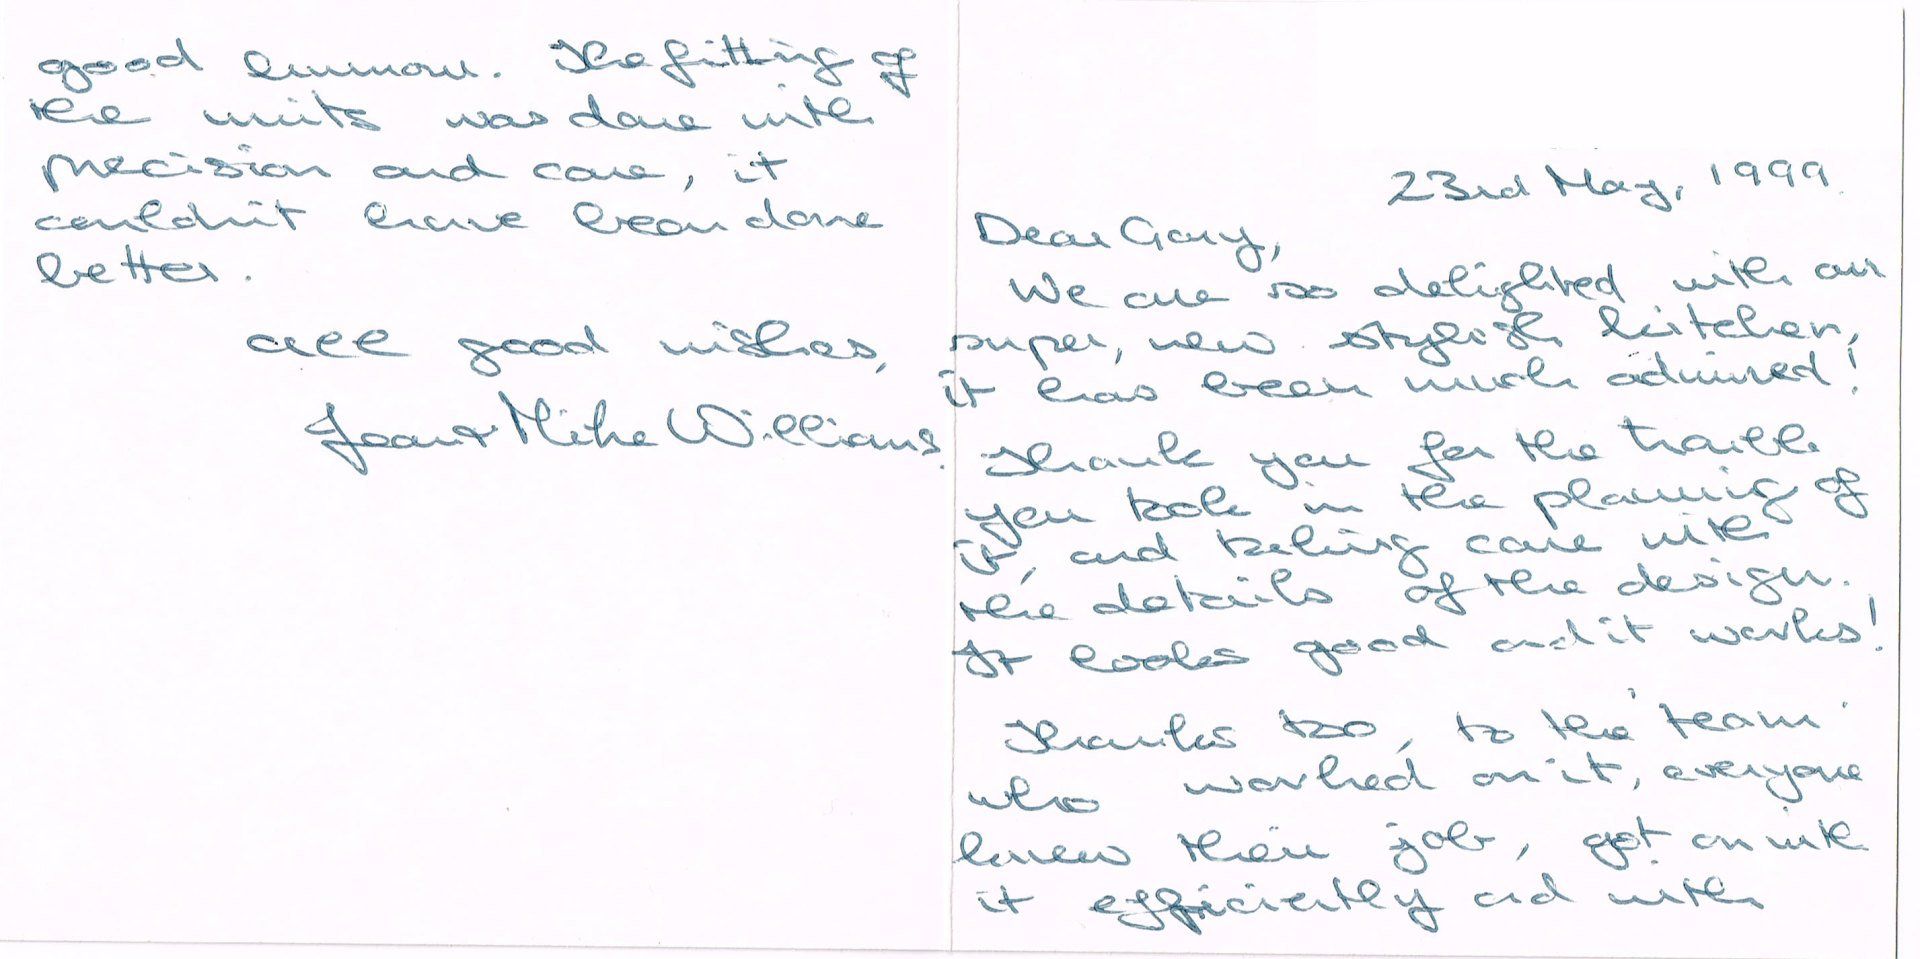 testimonial from Jean and Mike Williams in 1999